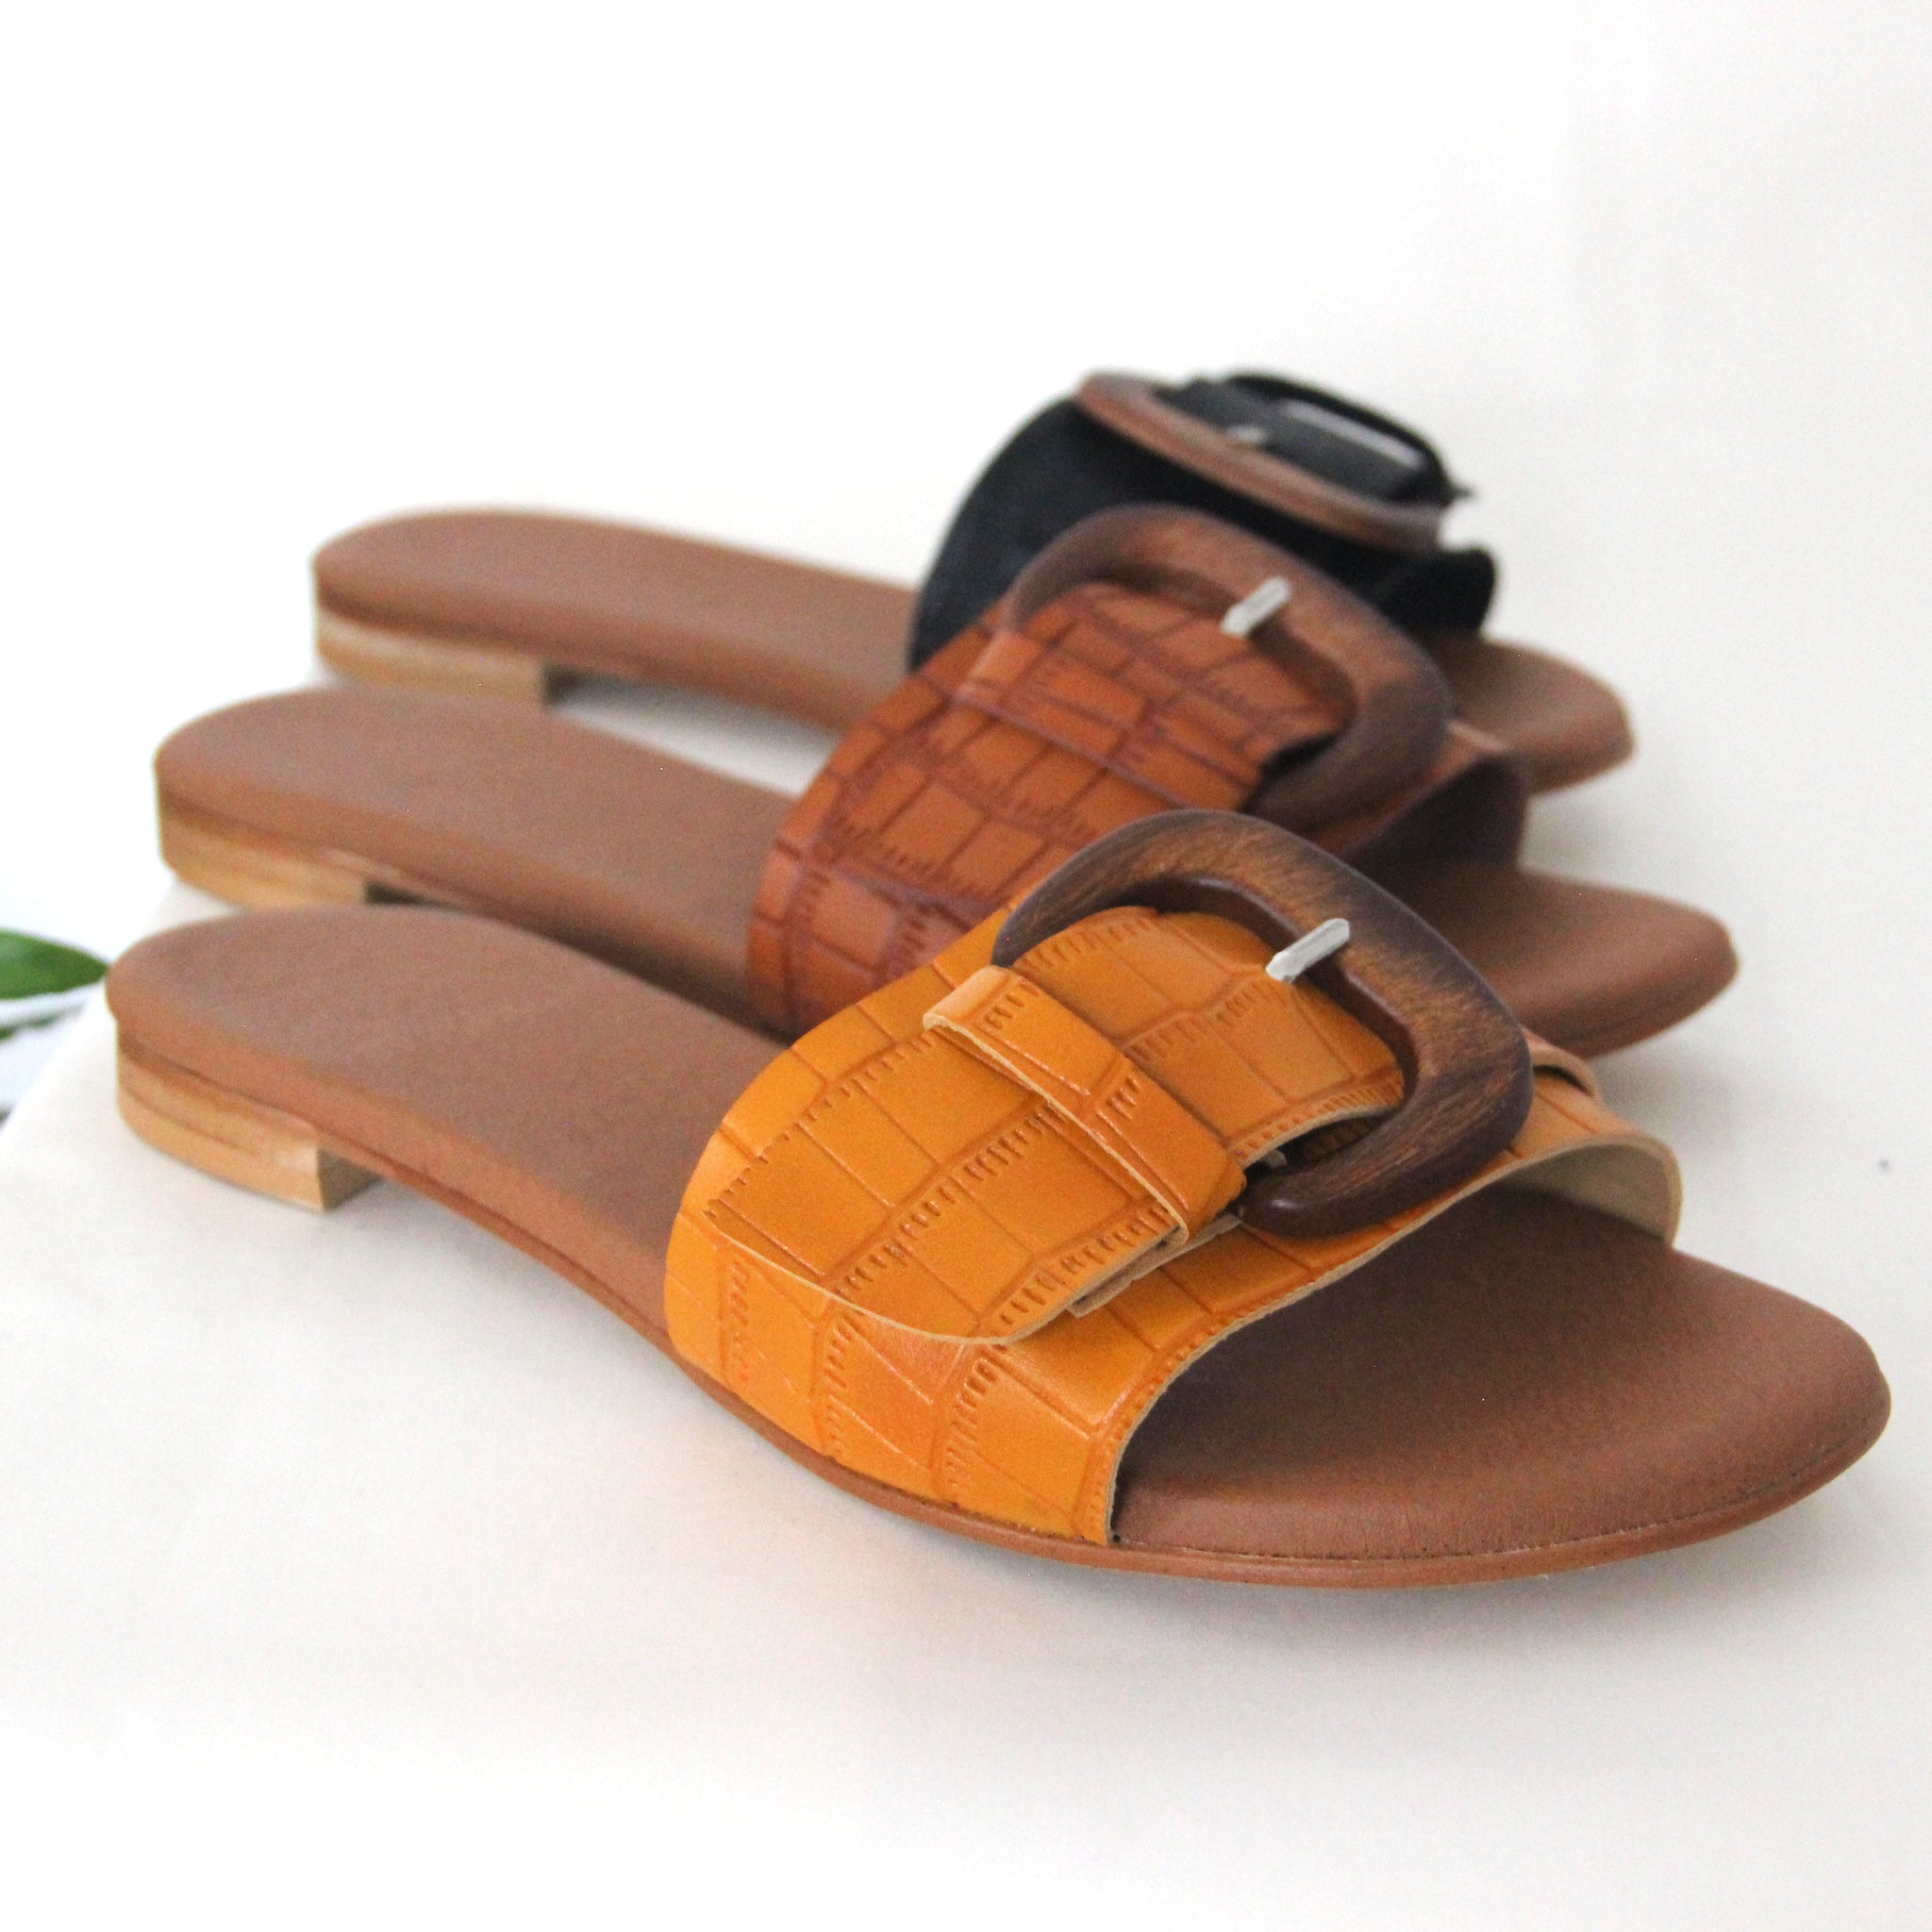 Sandals with buckle